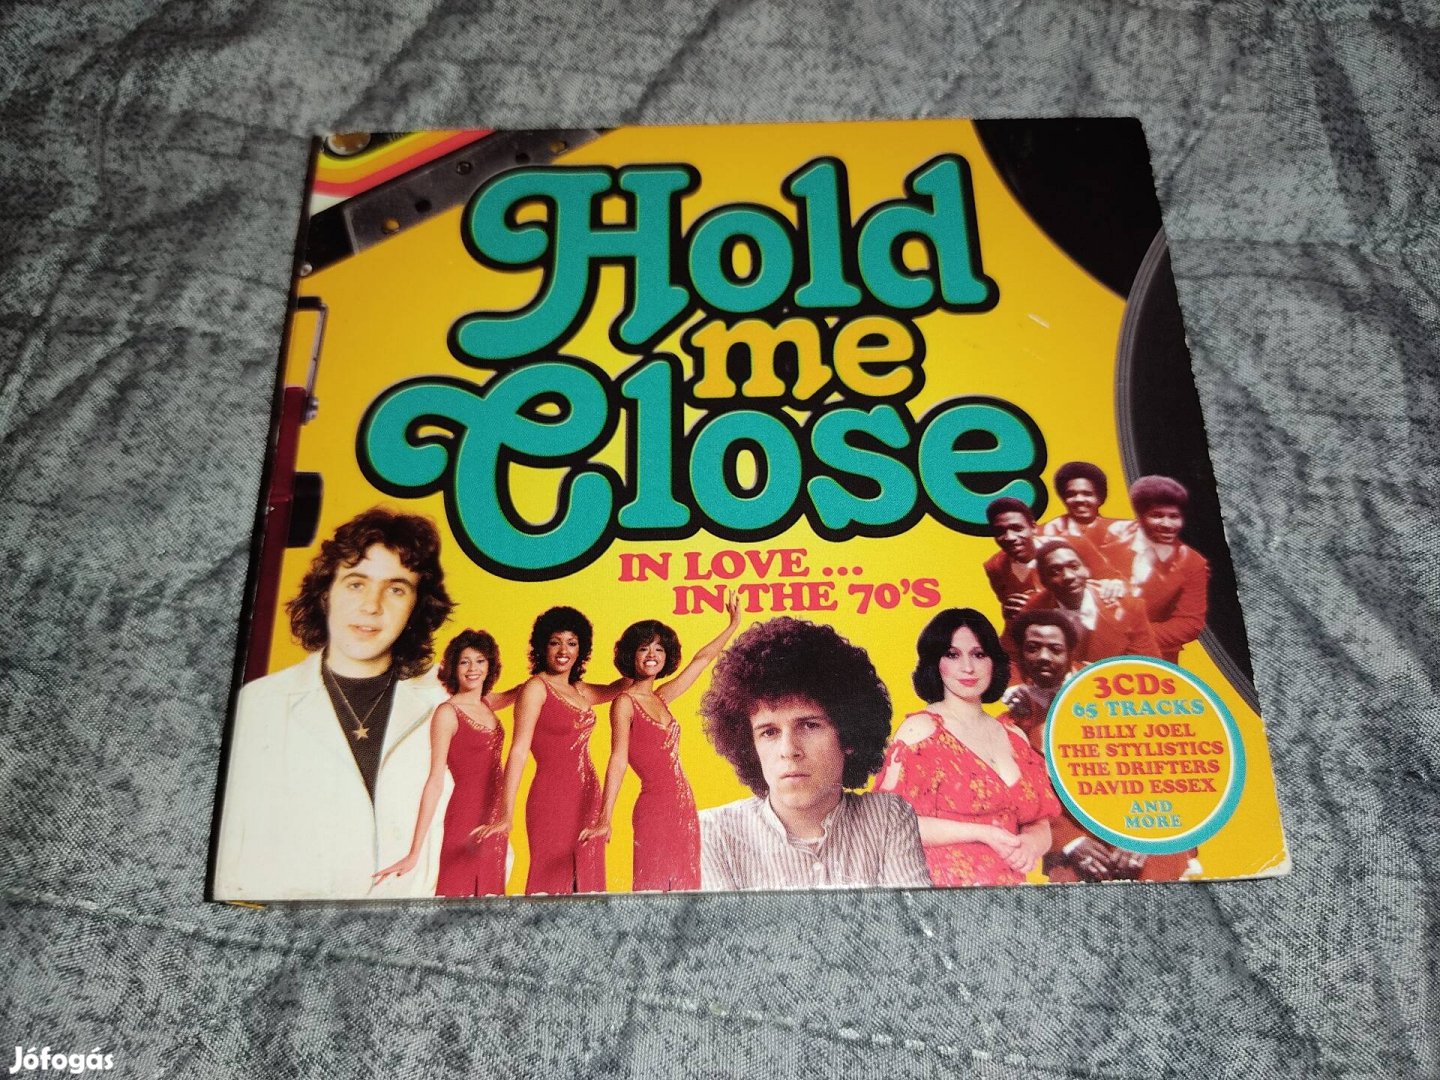 Hold Me Close In Love In The 70s (3CD)